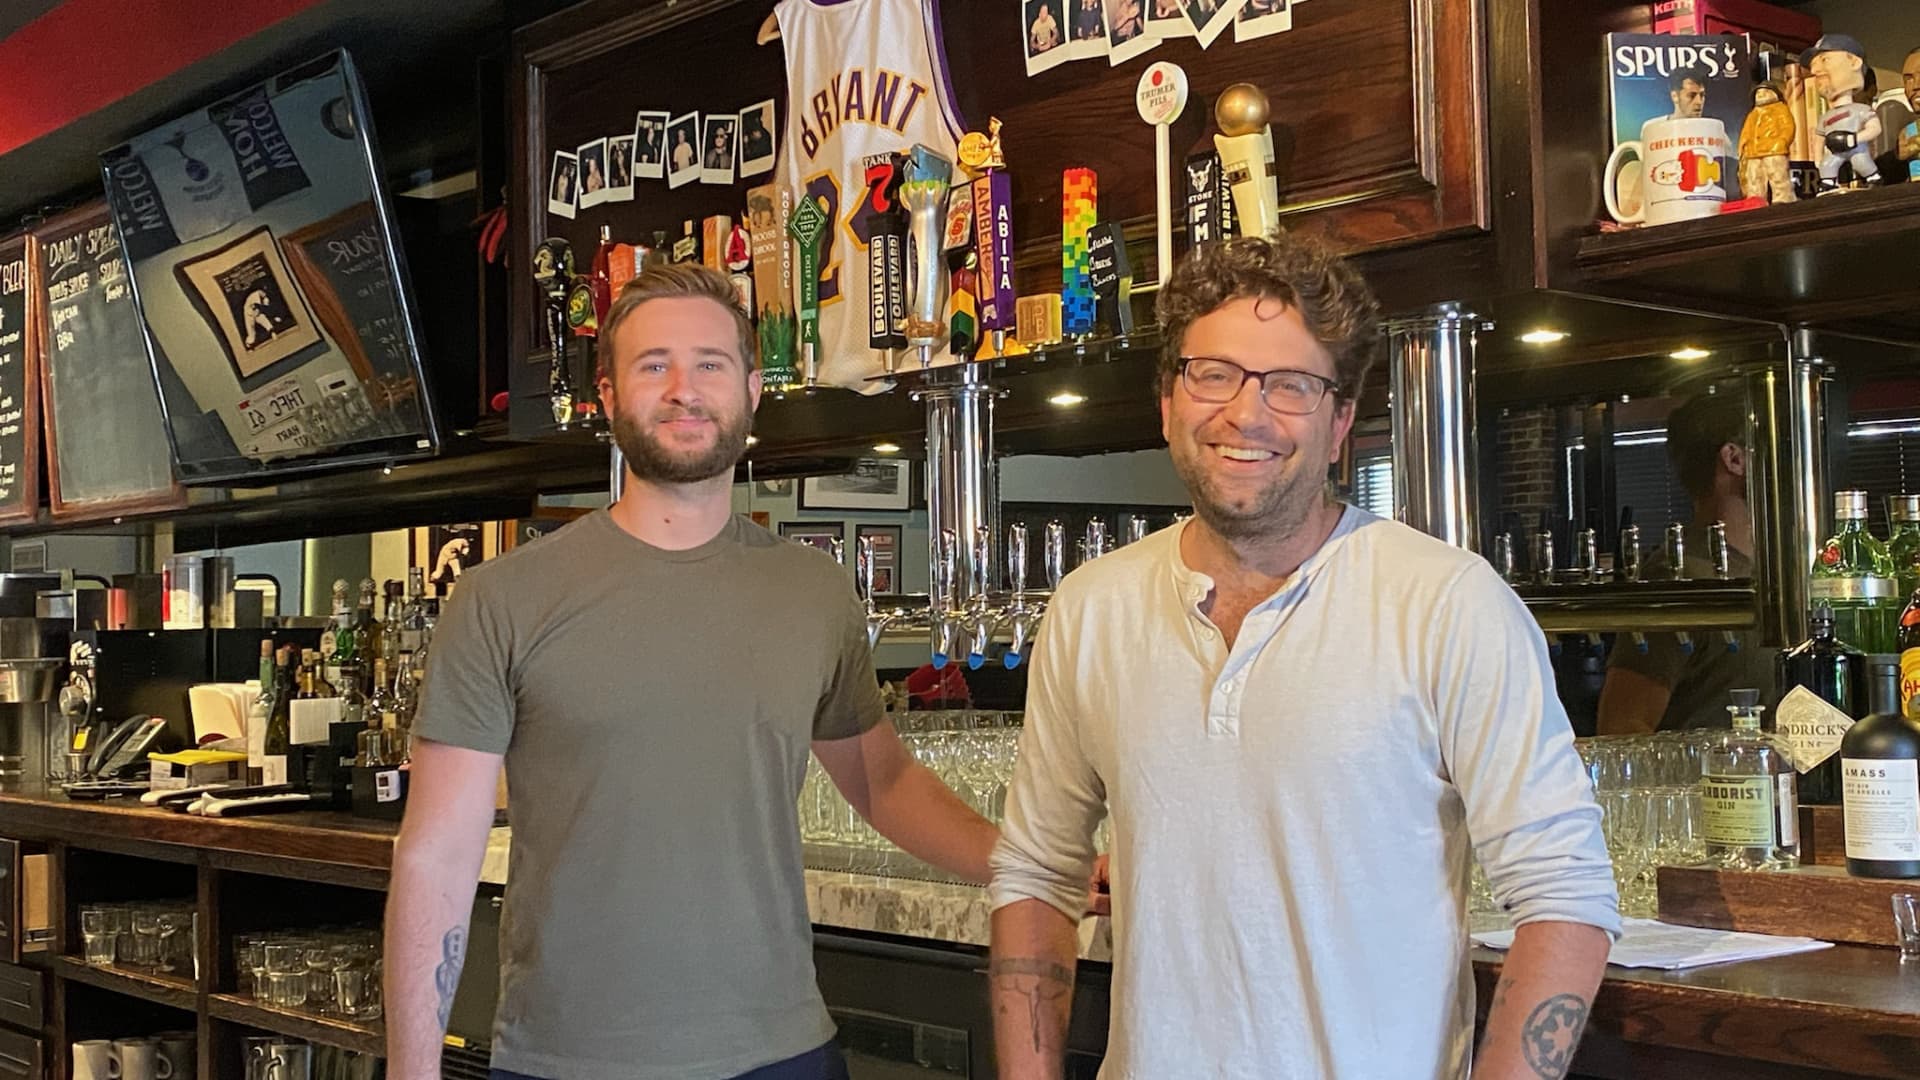 Steven Williams (L) and Matt Glassman (R) recently reopened The Greyhound Bar & Grill in Los Angeles, after being closed for over a year.